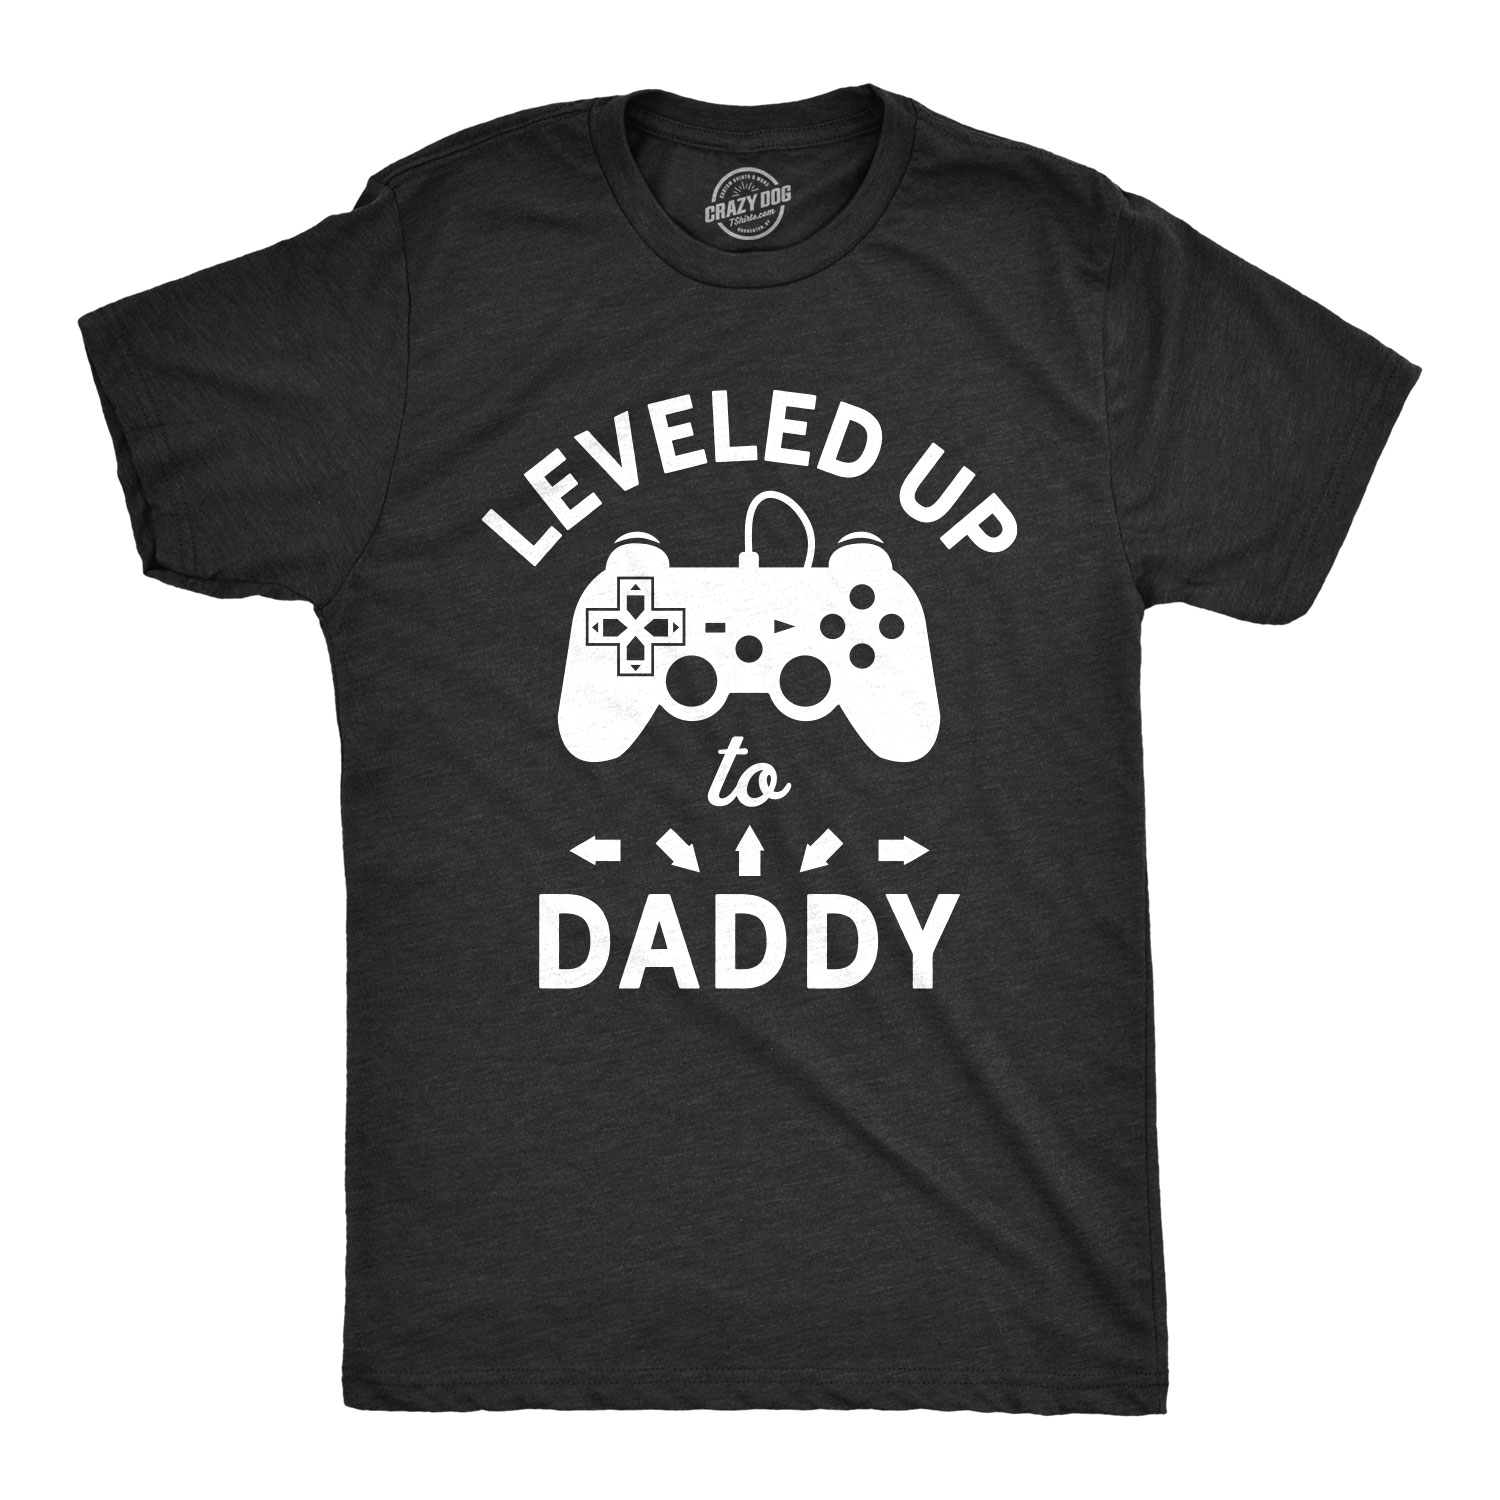 Crazy Dog Tshirts Mens Leveled Up To Daddy Tshirt Funny Video Game Fathers Day Tee